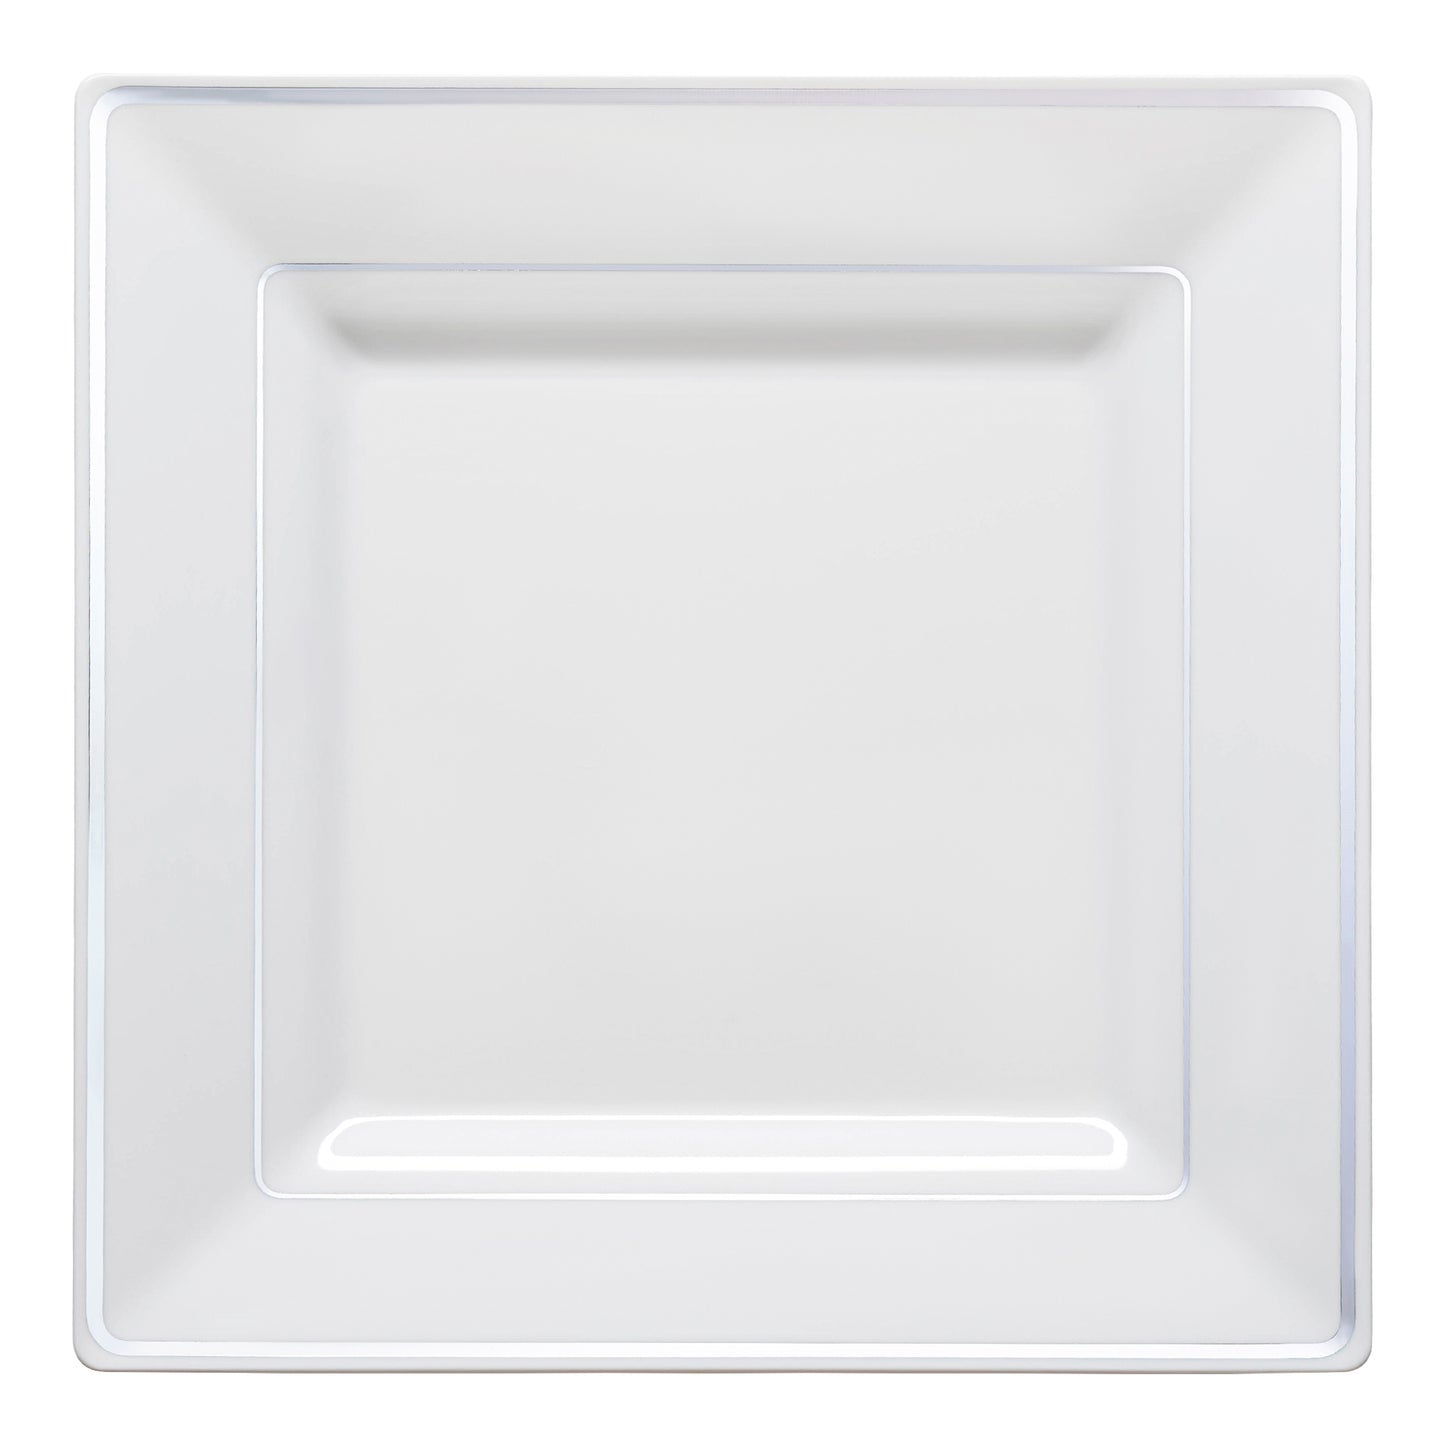 White with Silver Square Edge Rim Plastic Dinner Plates (9.5") | The Kaya Collection